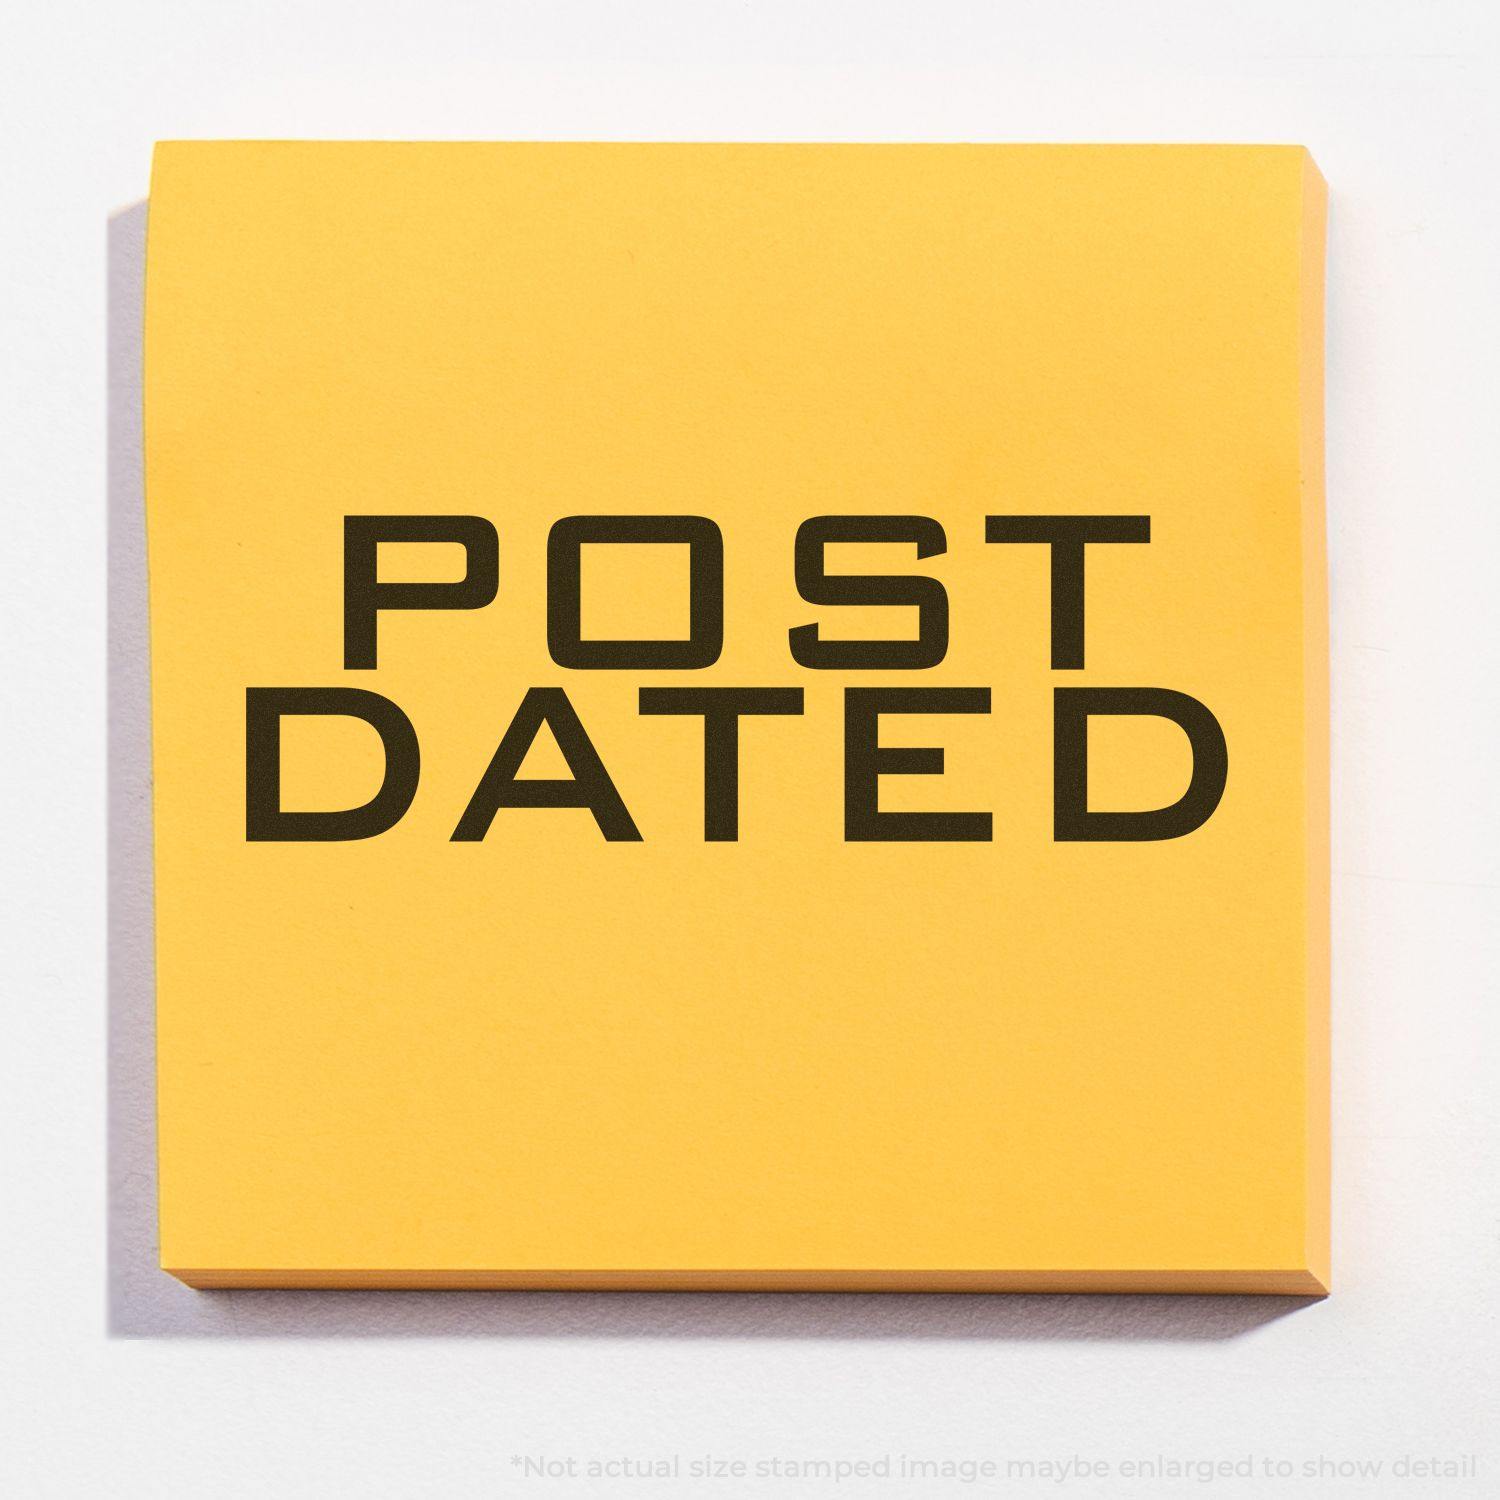 A stock office rubber stamp with a stamped image showing how the text "POST DATED" is displayed after stamping.